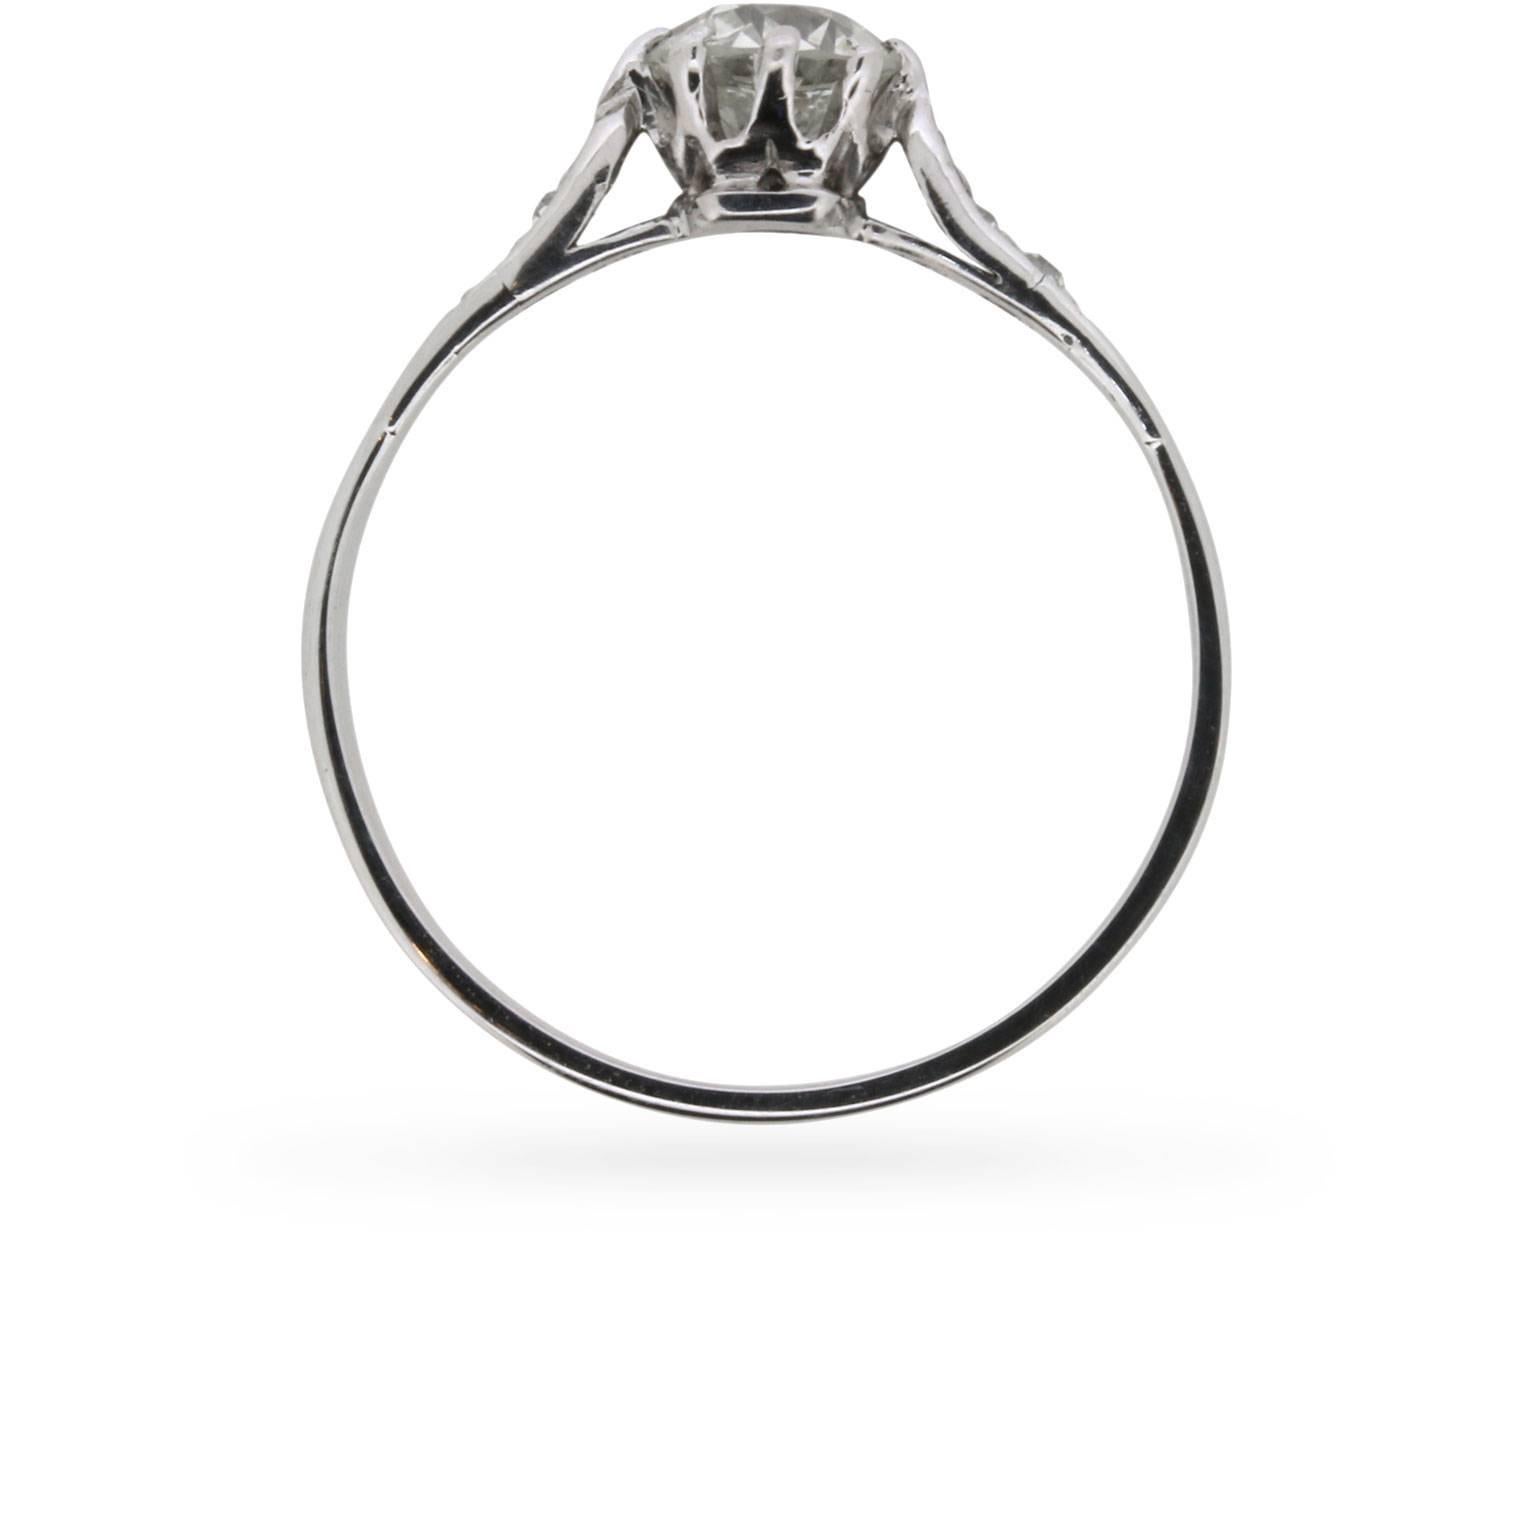 A stunning single diamond solitaire ring, with full EDR certification. The centre stone has been graded as a colour I and clarity SI2, and sits beautifully within the mount. The ring dates back to the 1920s and weighs 0.73 carat. The mount and band